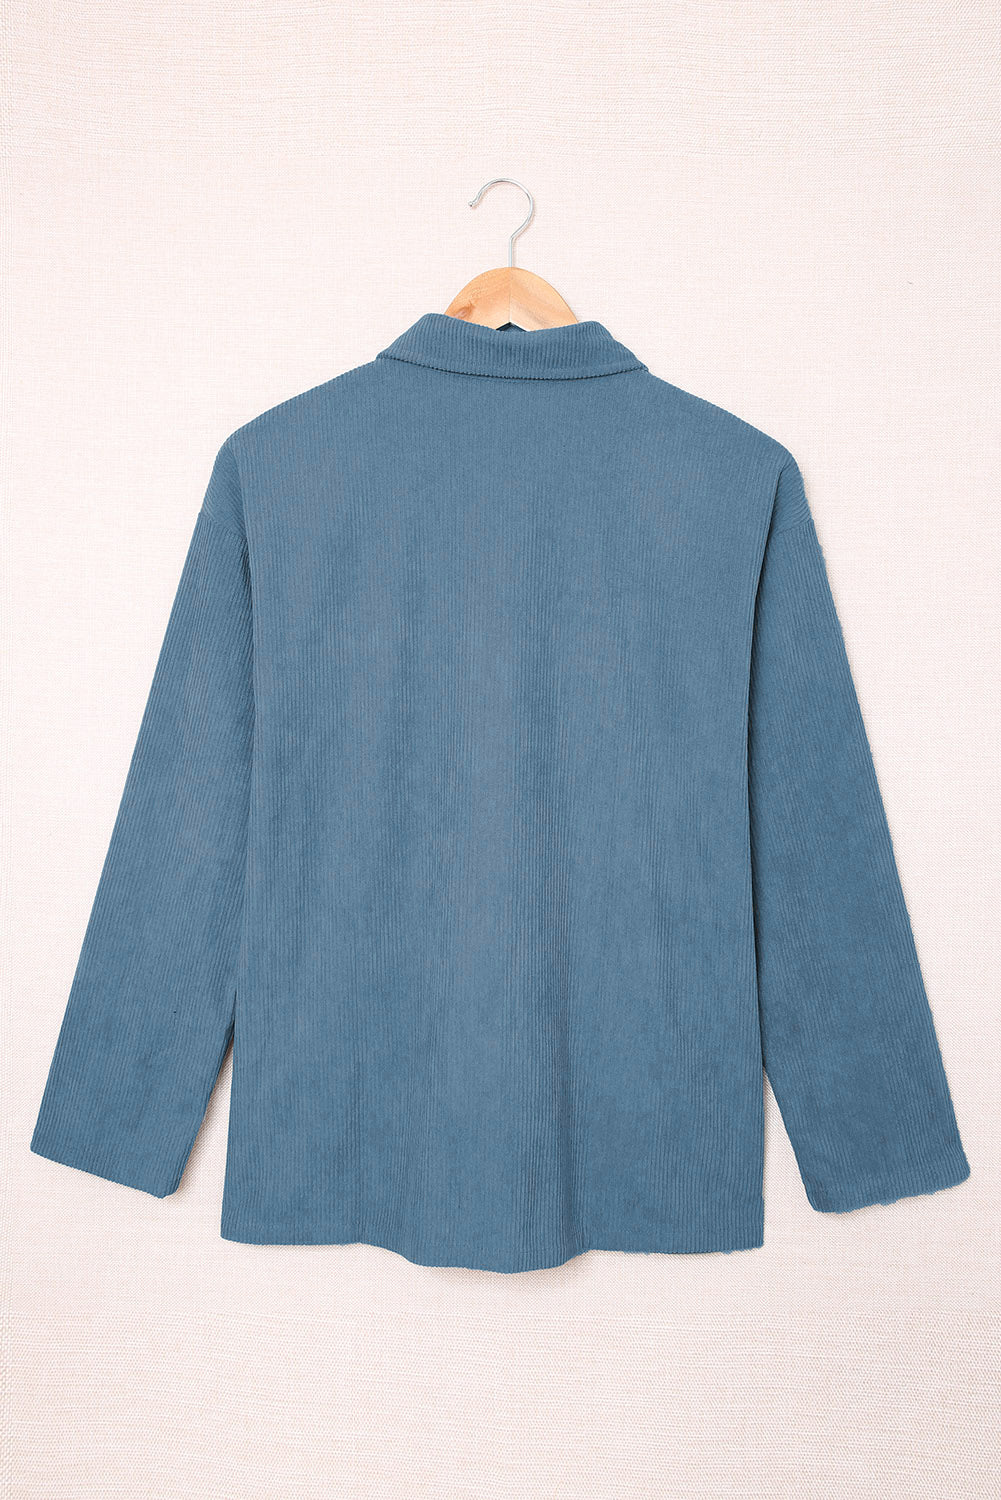 LC8511383-5-S, LC8511383-5-M, LC8511383-5-L, LC8511383-5-XL, LC8511383-5-2XL, Blue Womens Boyfriend Shirt Ribbed Shacket Loose Fit Long Sleeve Tops